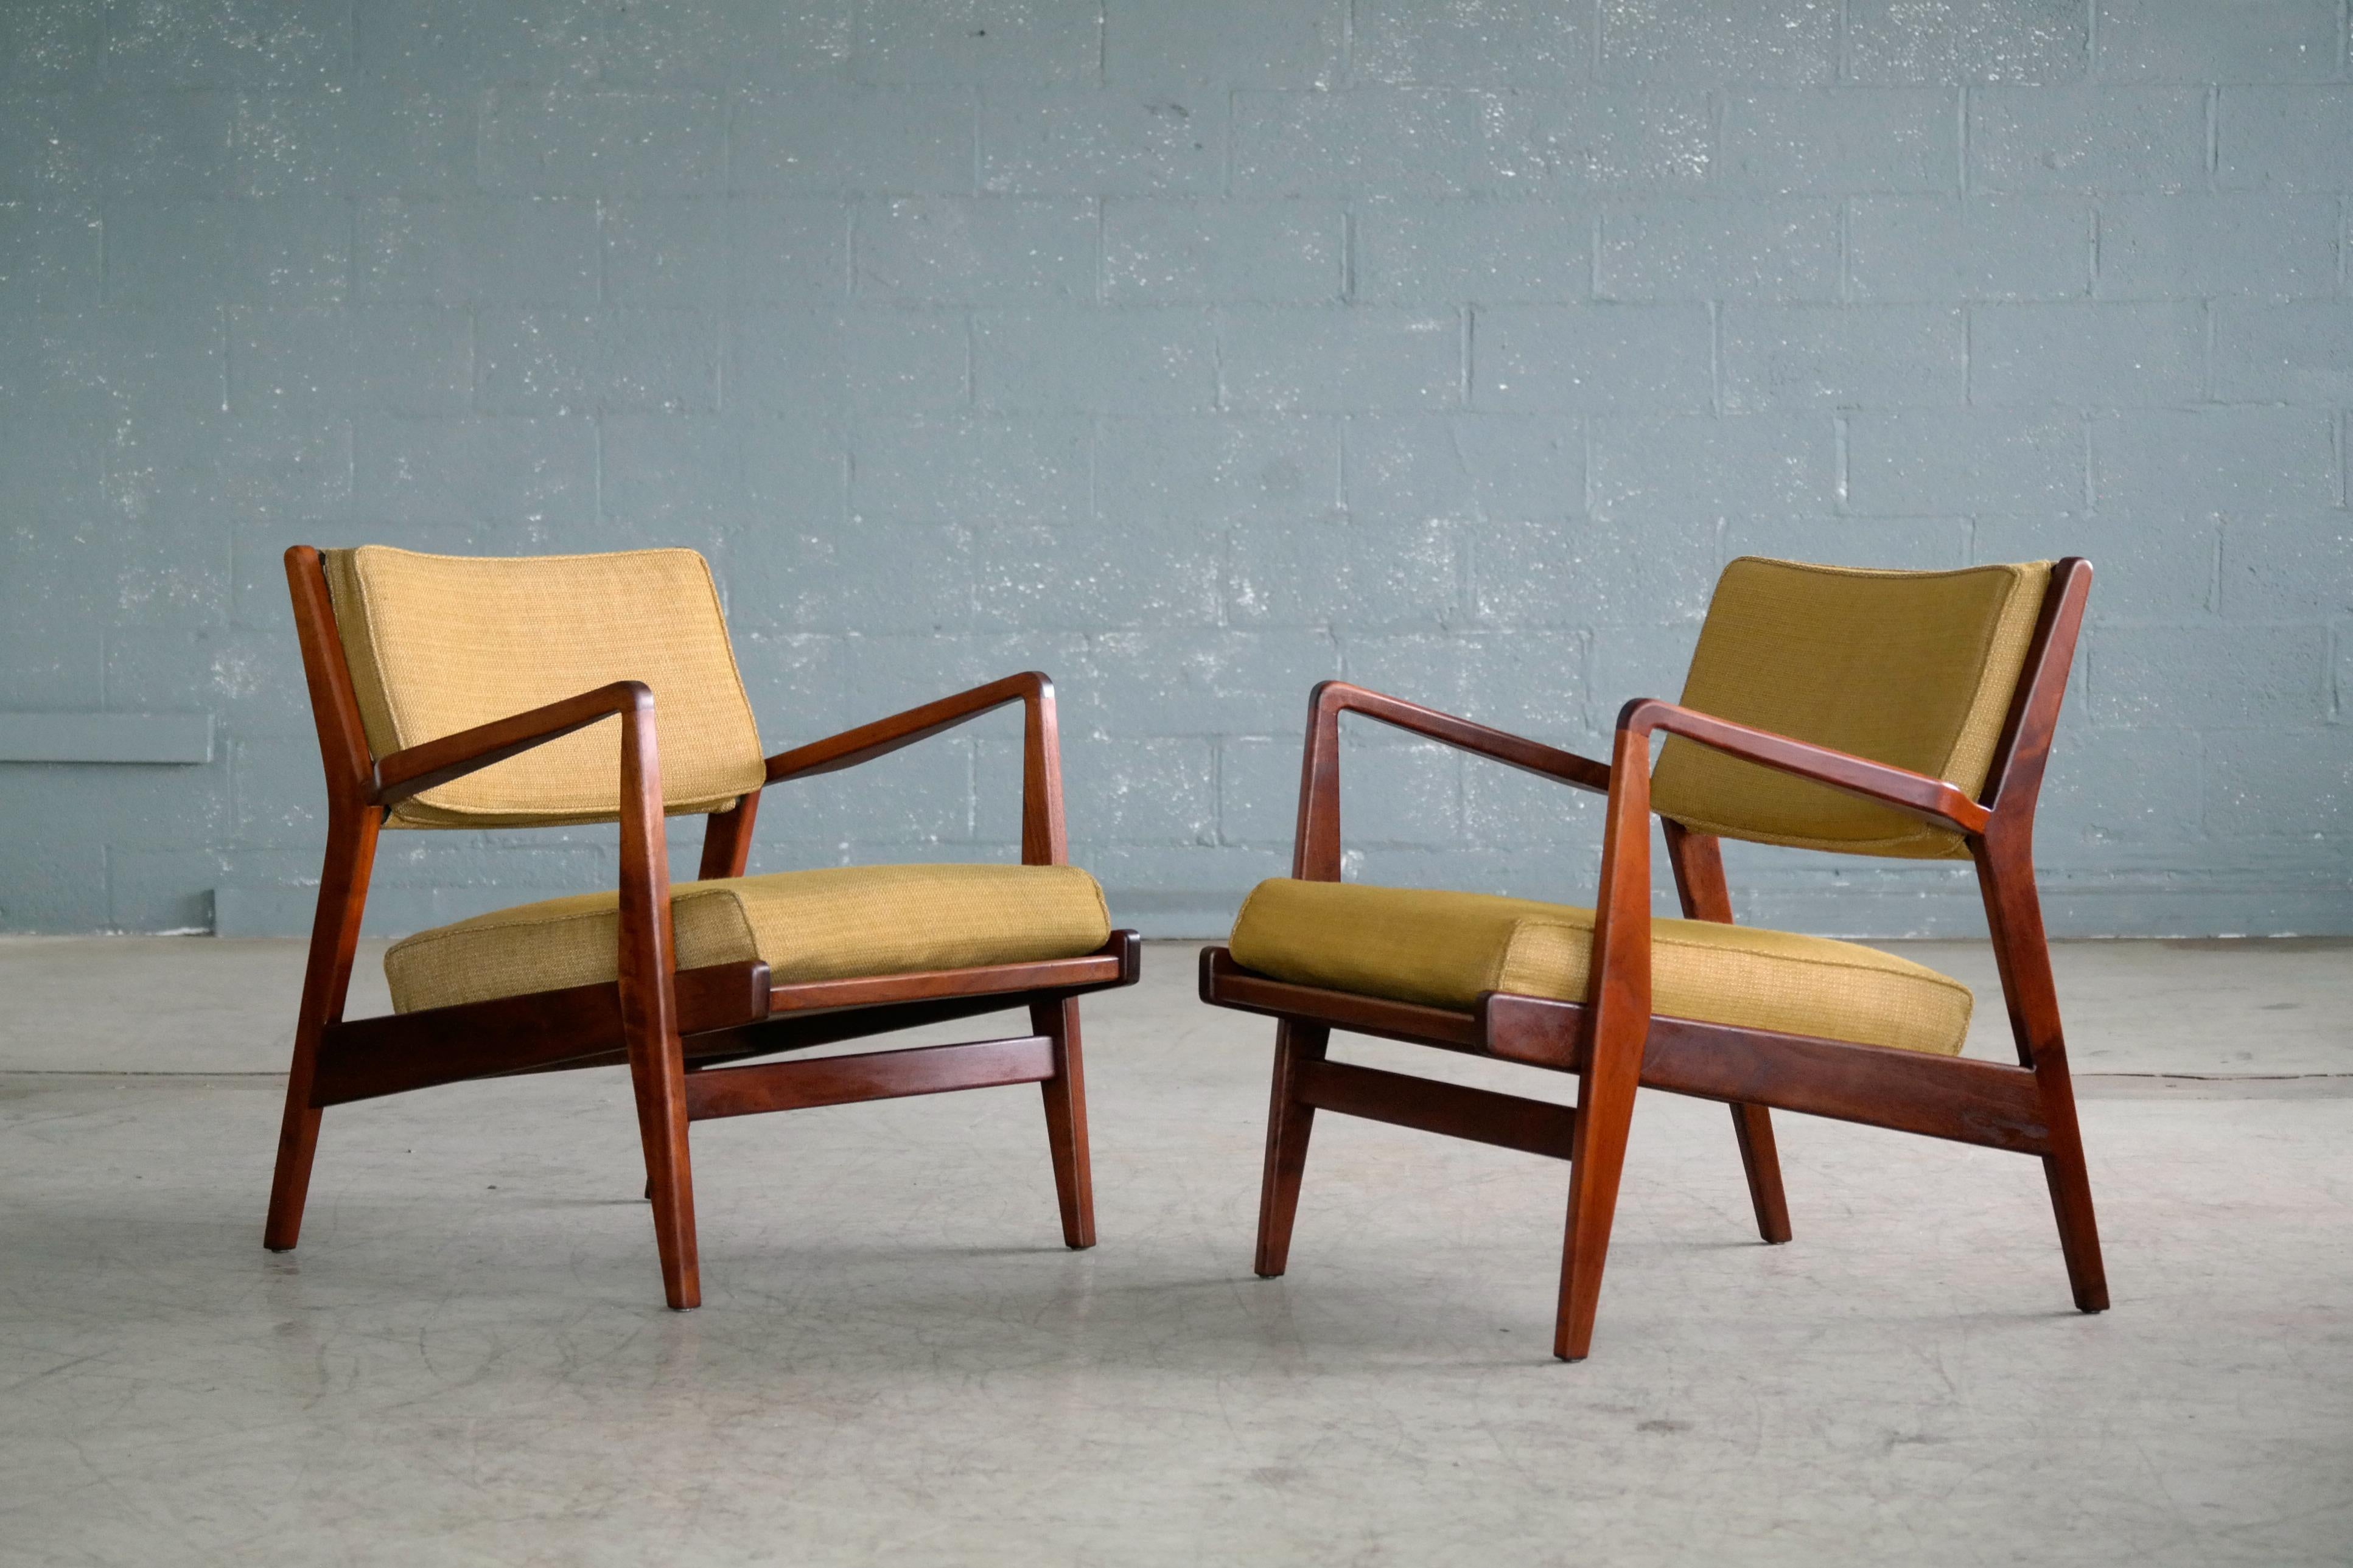 Superb pair of Jens Risom lounge chairs in walnut from the mid-1960s. Beautiful original condition with the wooden frames in mint condition showing great color and grain and the cushions showing minor wear and some hardening of the foam. We do